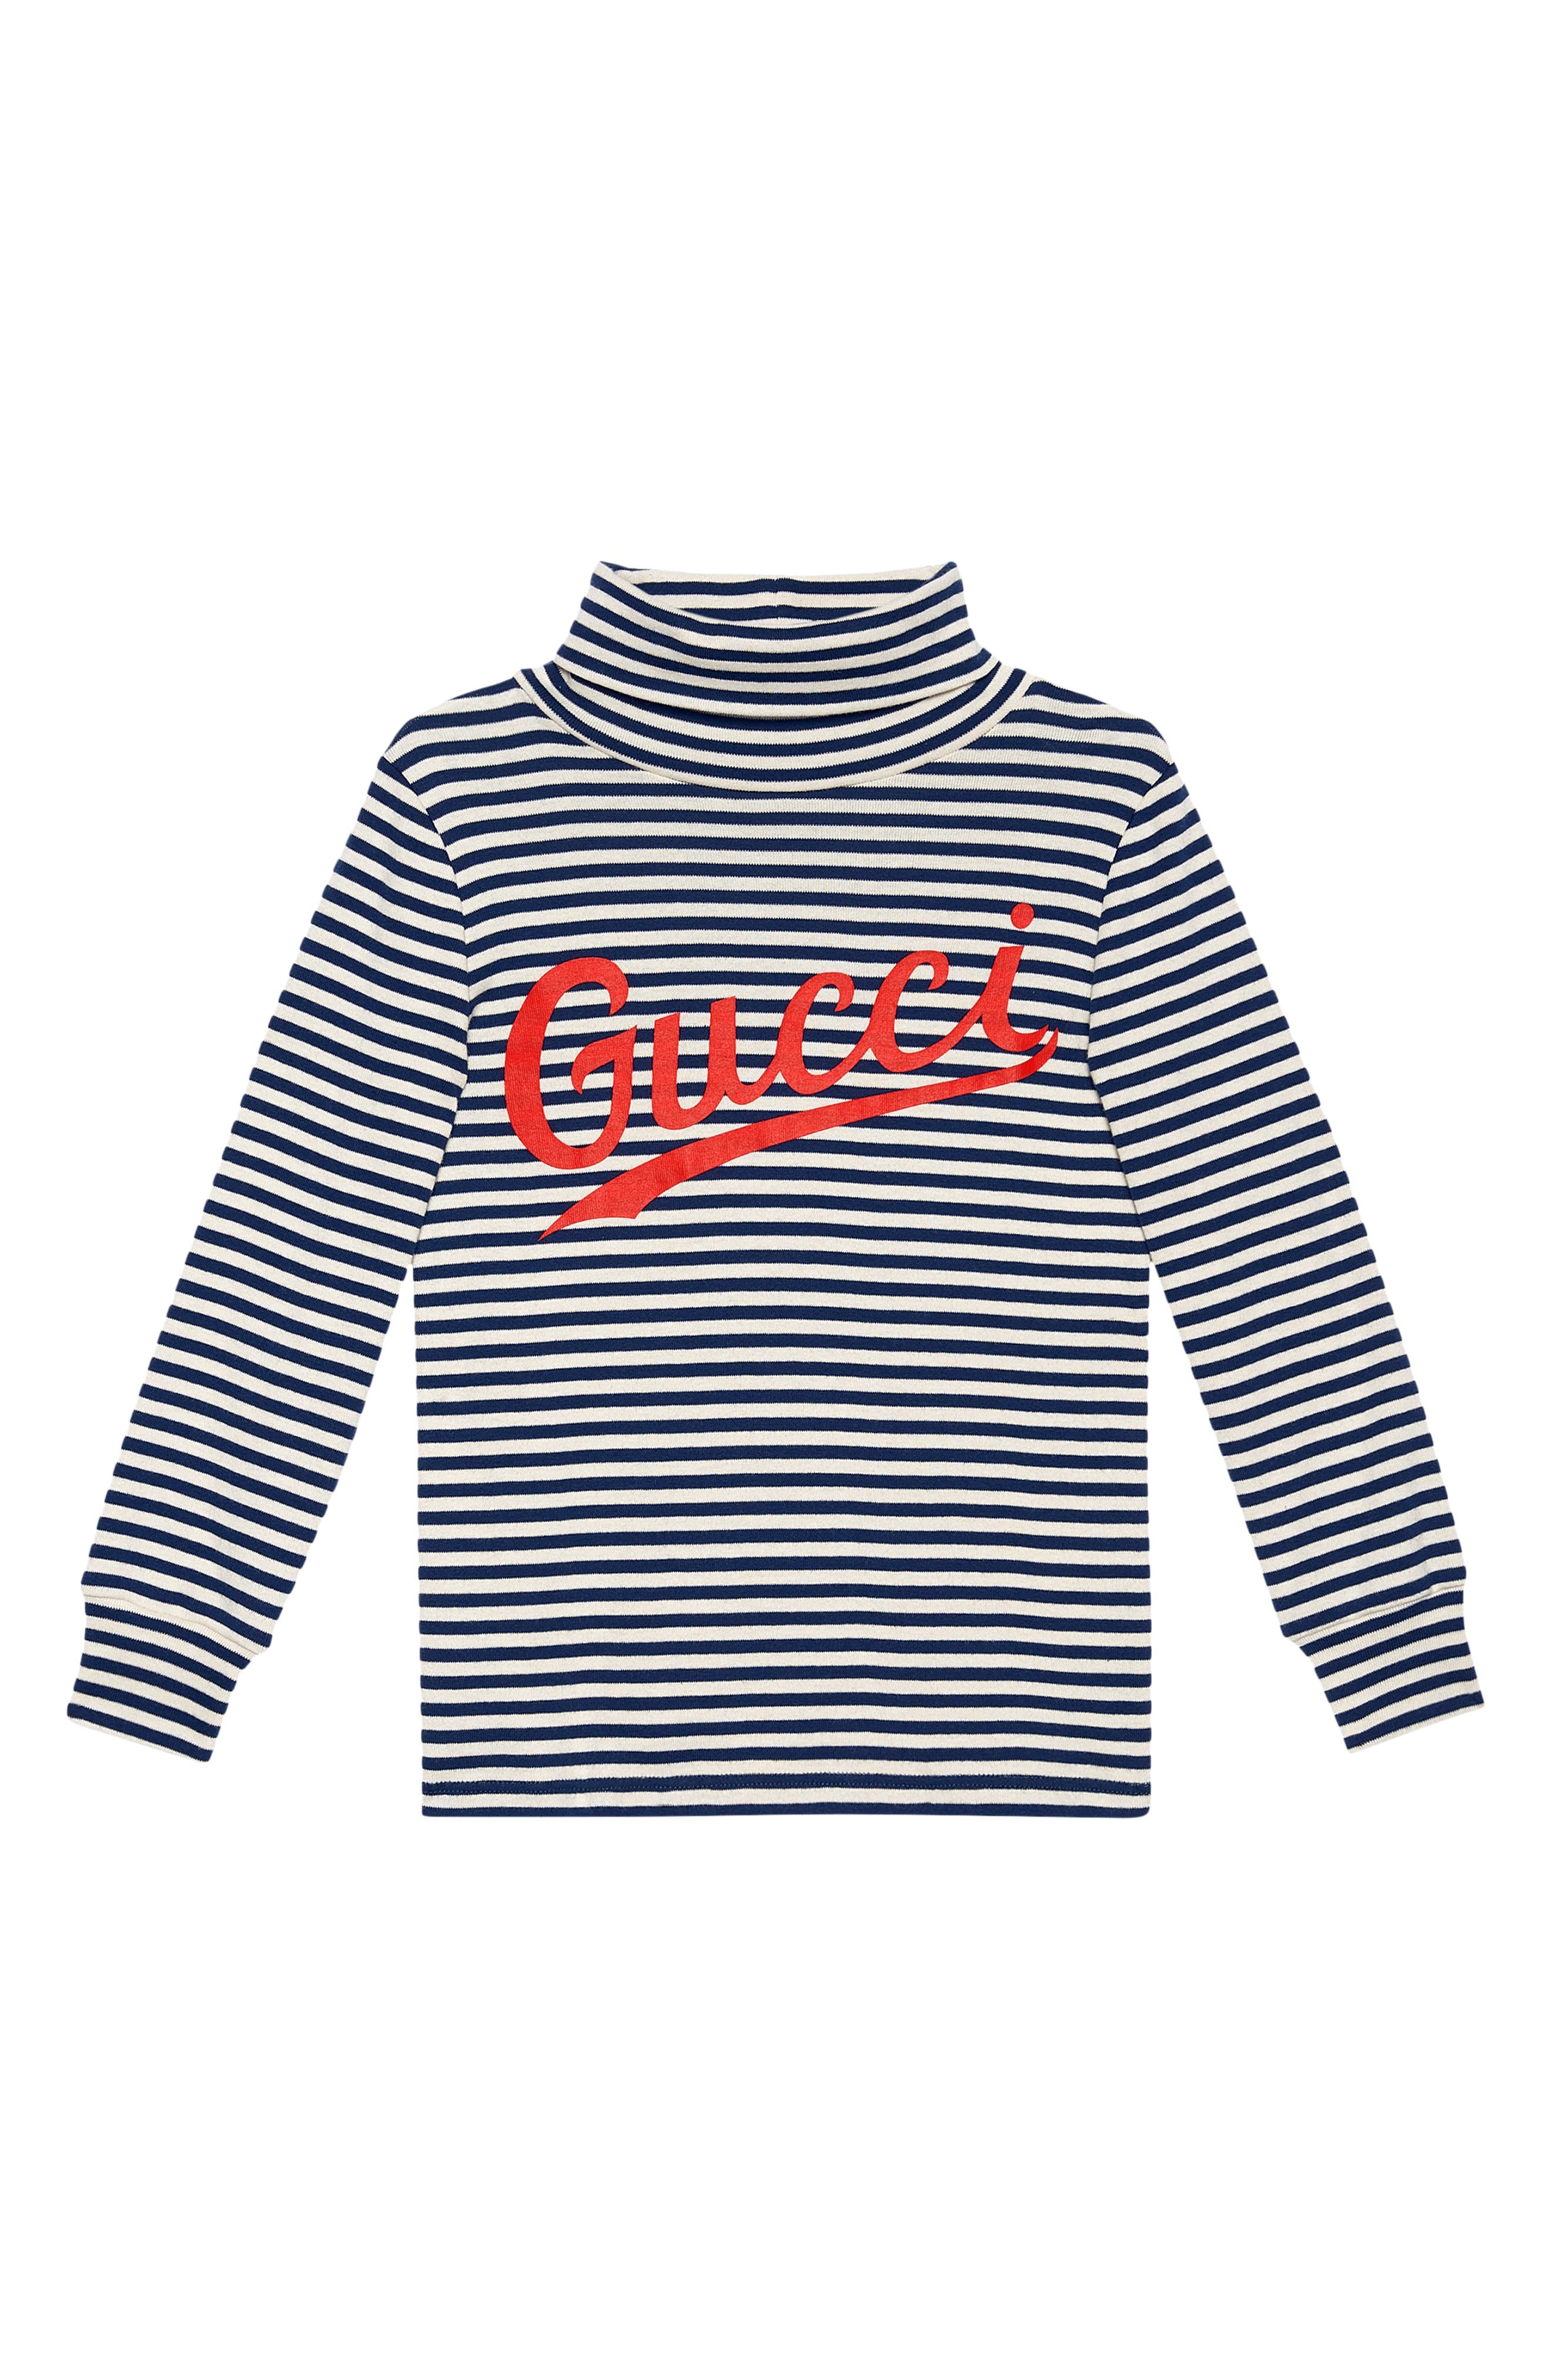 gucci clothes for kids boys